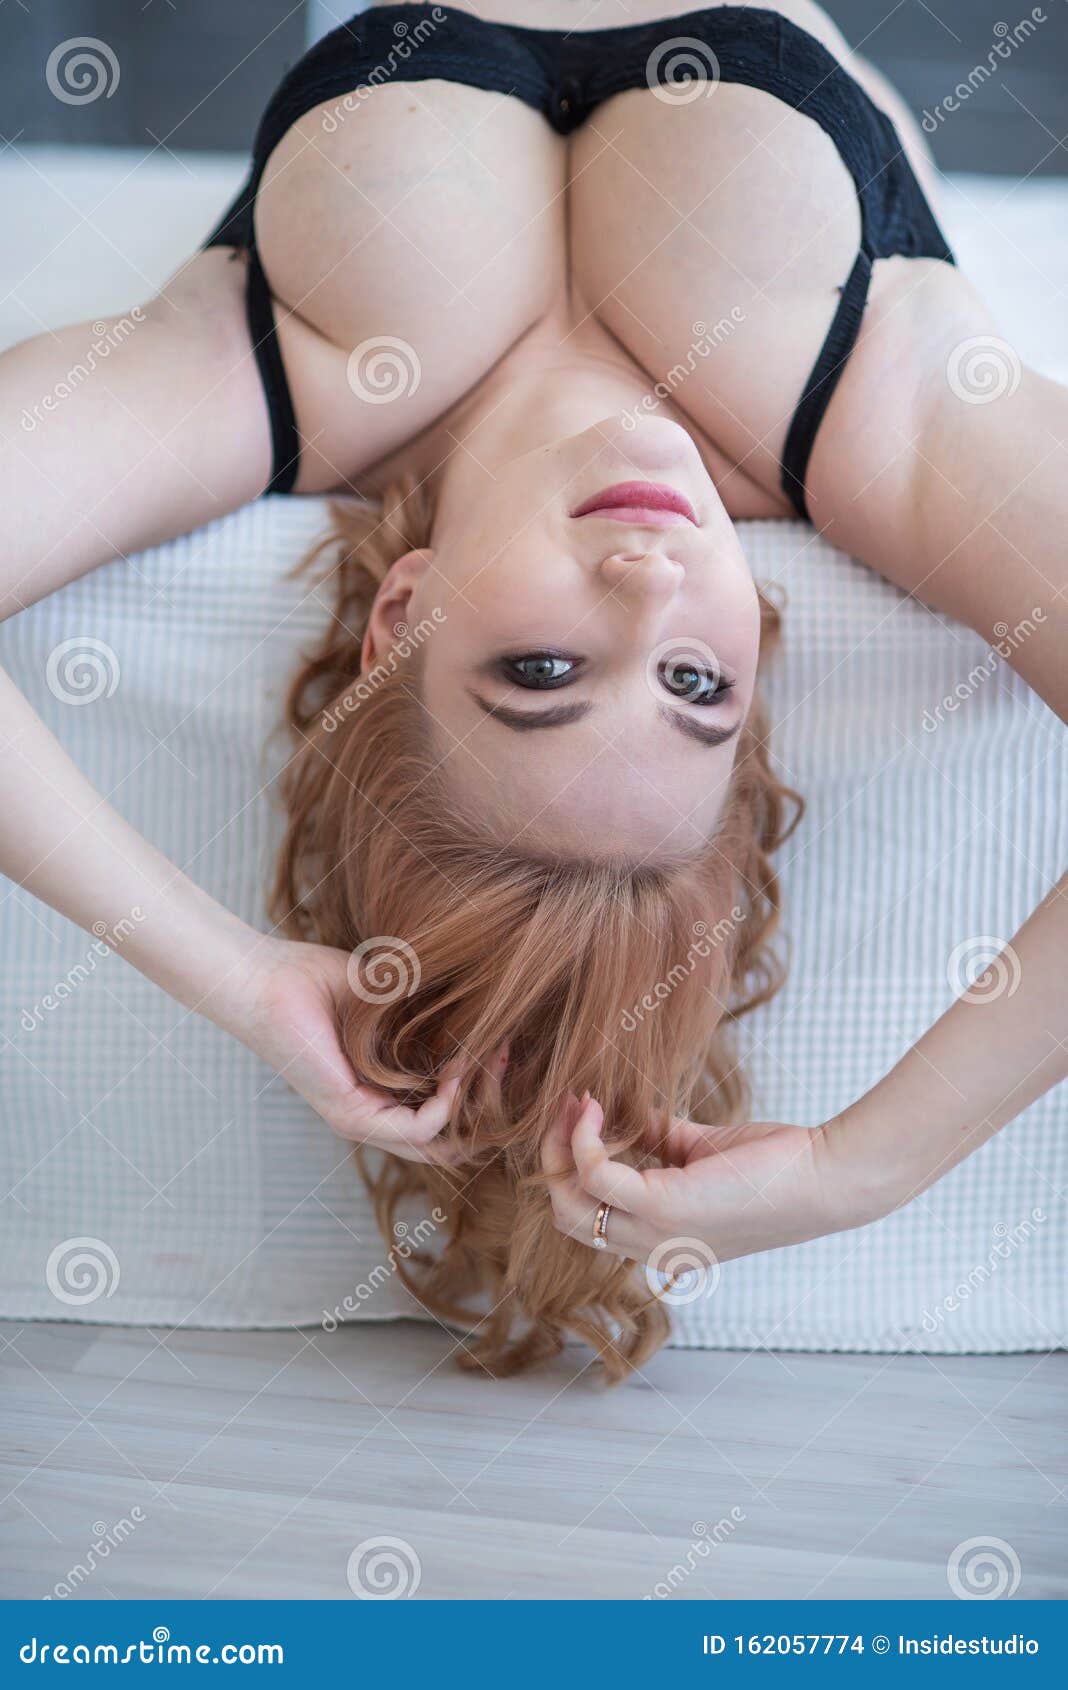 https://thumbs.dreamstime.com/z/young-attractive-girl-very-large-breasts-underwear-lies-her-back-straightens-her-hair-her-head-young-162057774.jpg